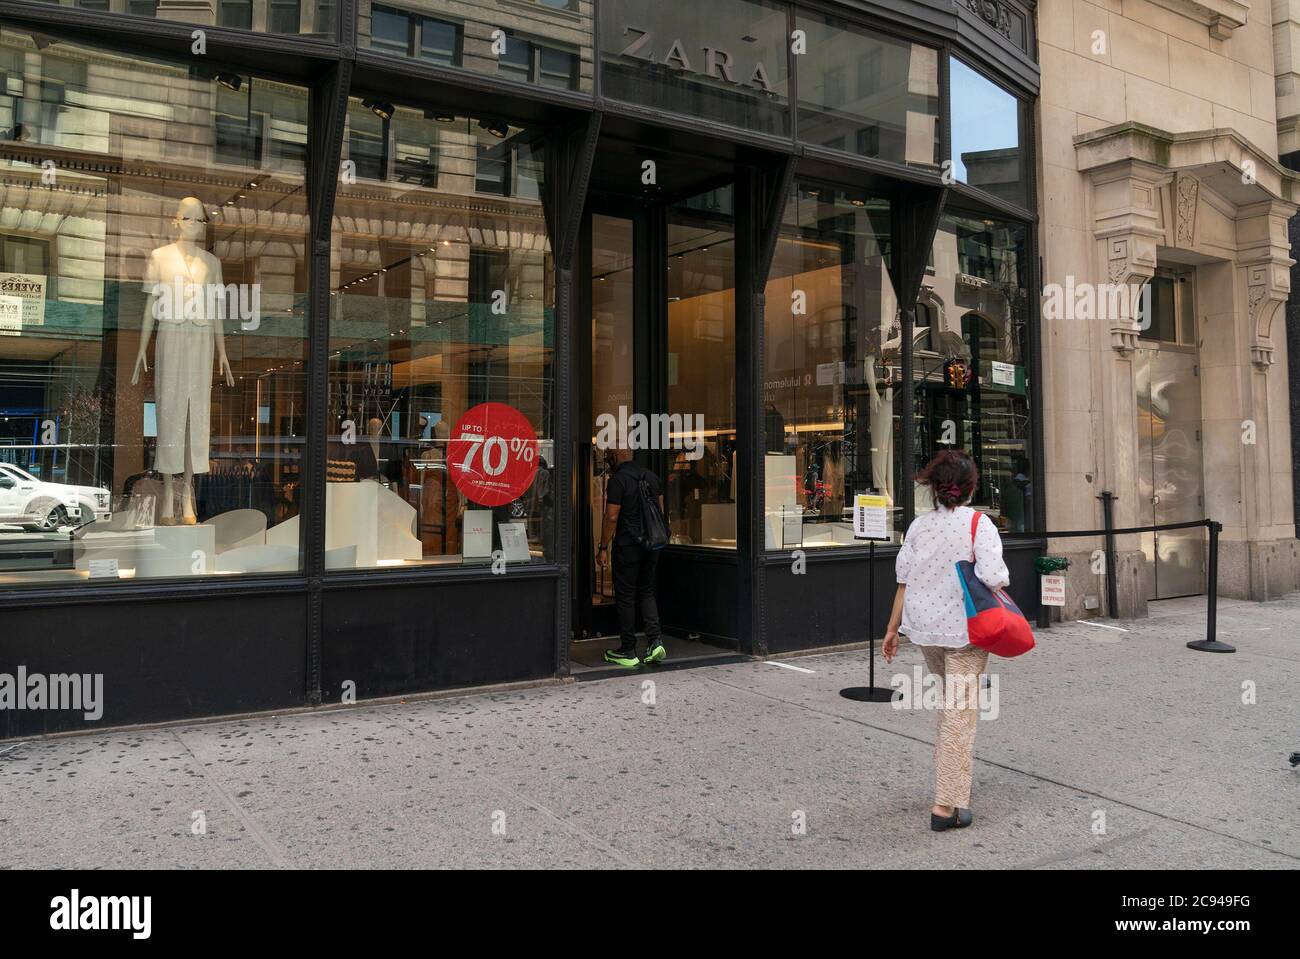 New York, United States. 28th July, 2020. Customer enters Zara store on 5th  Avenue, Manhattan. Inditex, owner of brand plans to close more than 1000  stores around the world. Company announced that